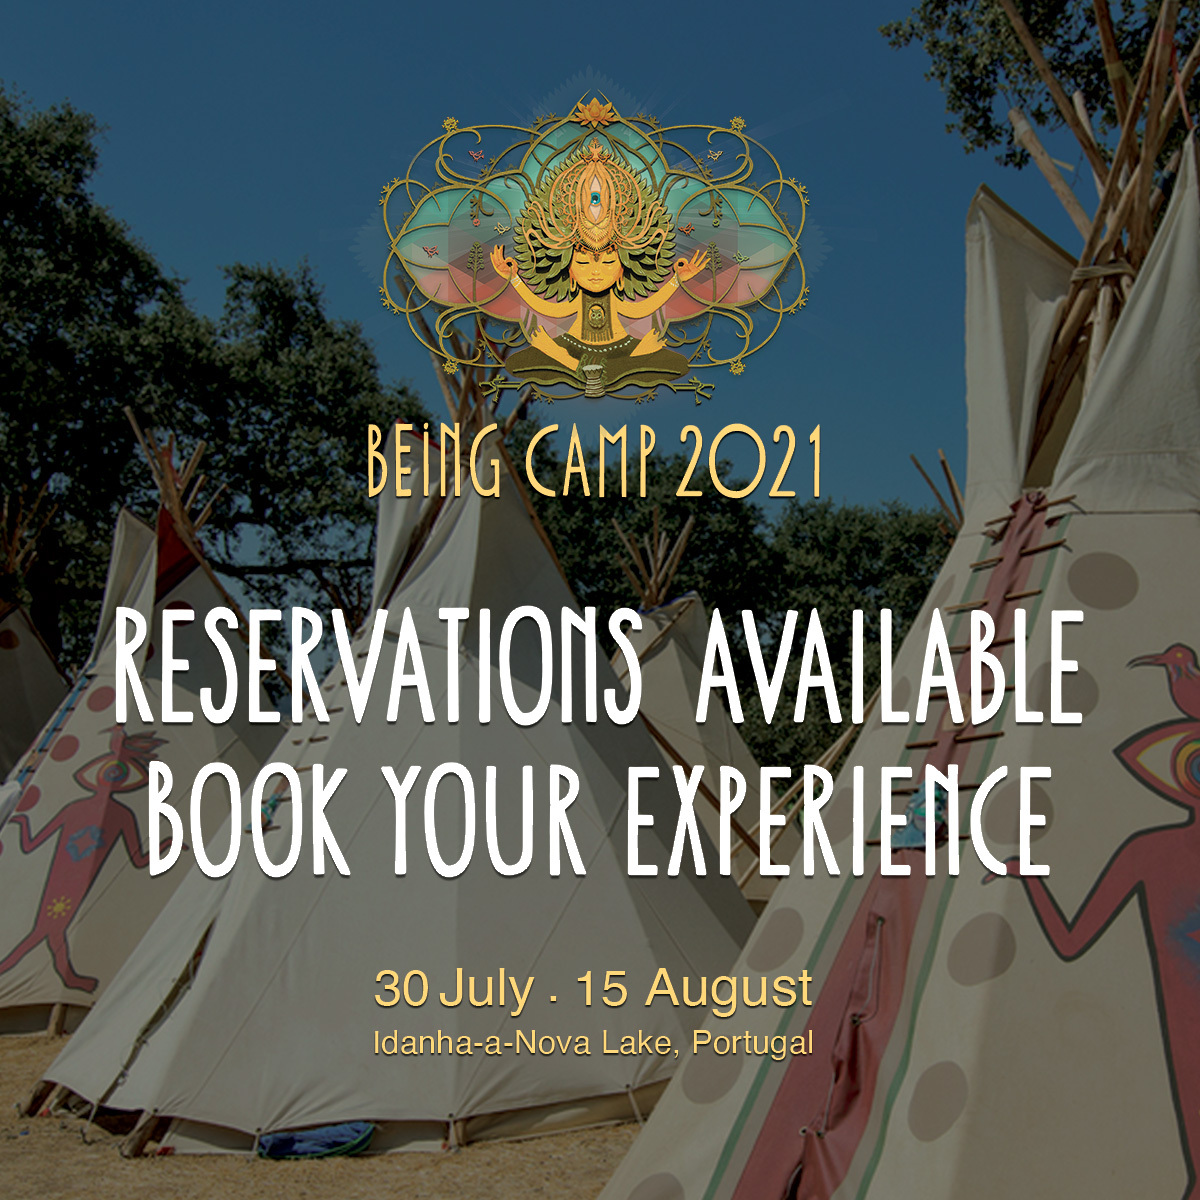 We’re living in times of separation, so we’re supporting the connection between like-minded human beings, inspired by our #BeingGathering concept ❤️The #BeingCamp2021 is a well-being camping experience. Reservations and activities available 🔗 being-gathering.org